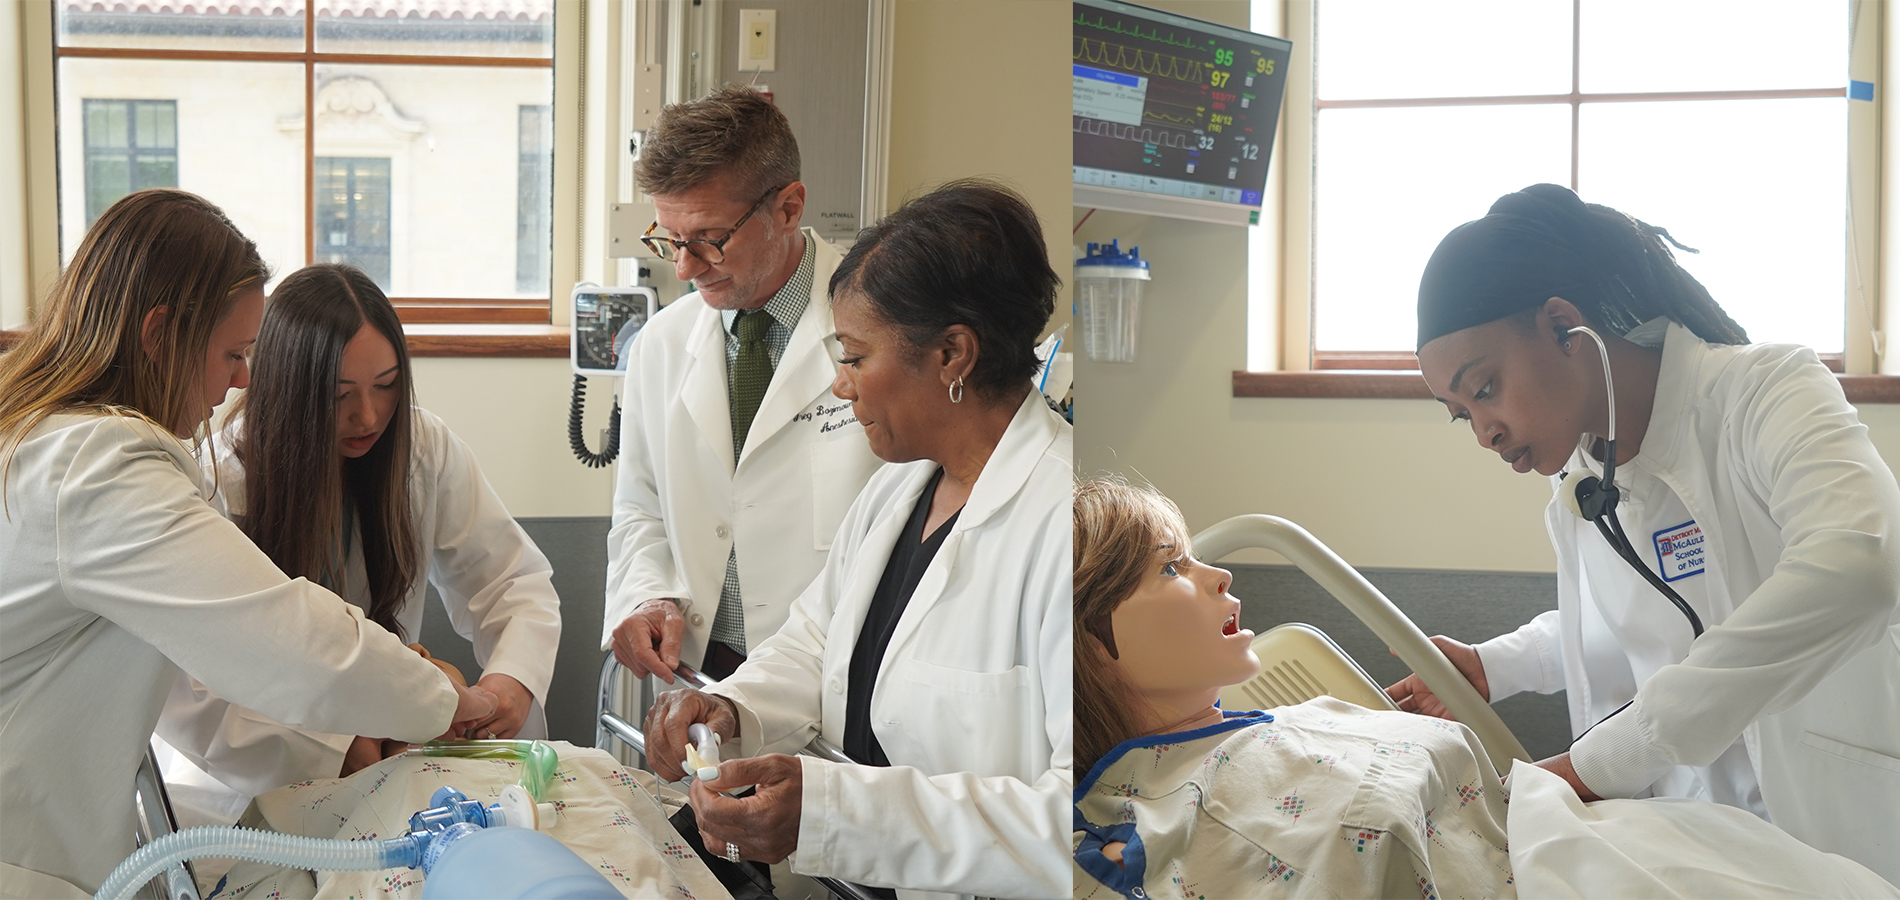 Five people are pictured standing and working on a mannequin patient inside STAR simulation center classrooms.